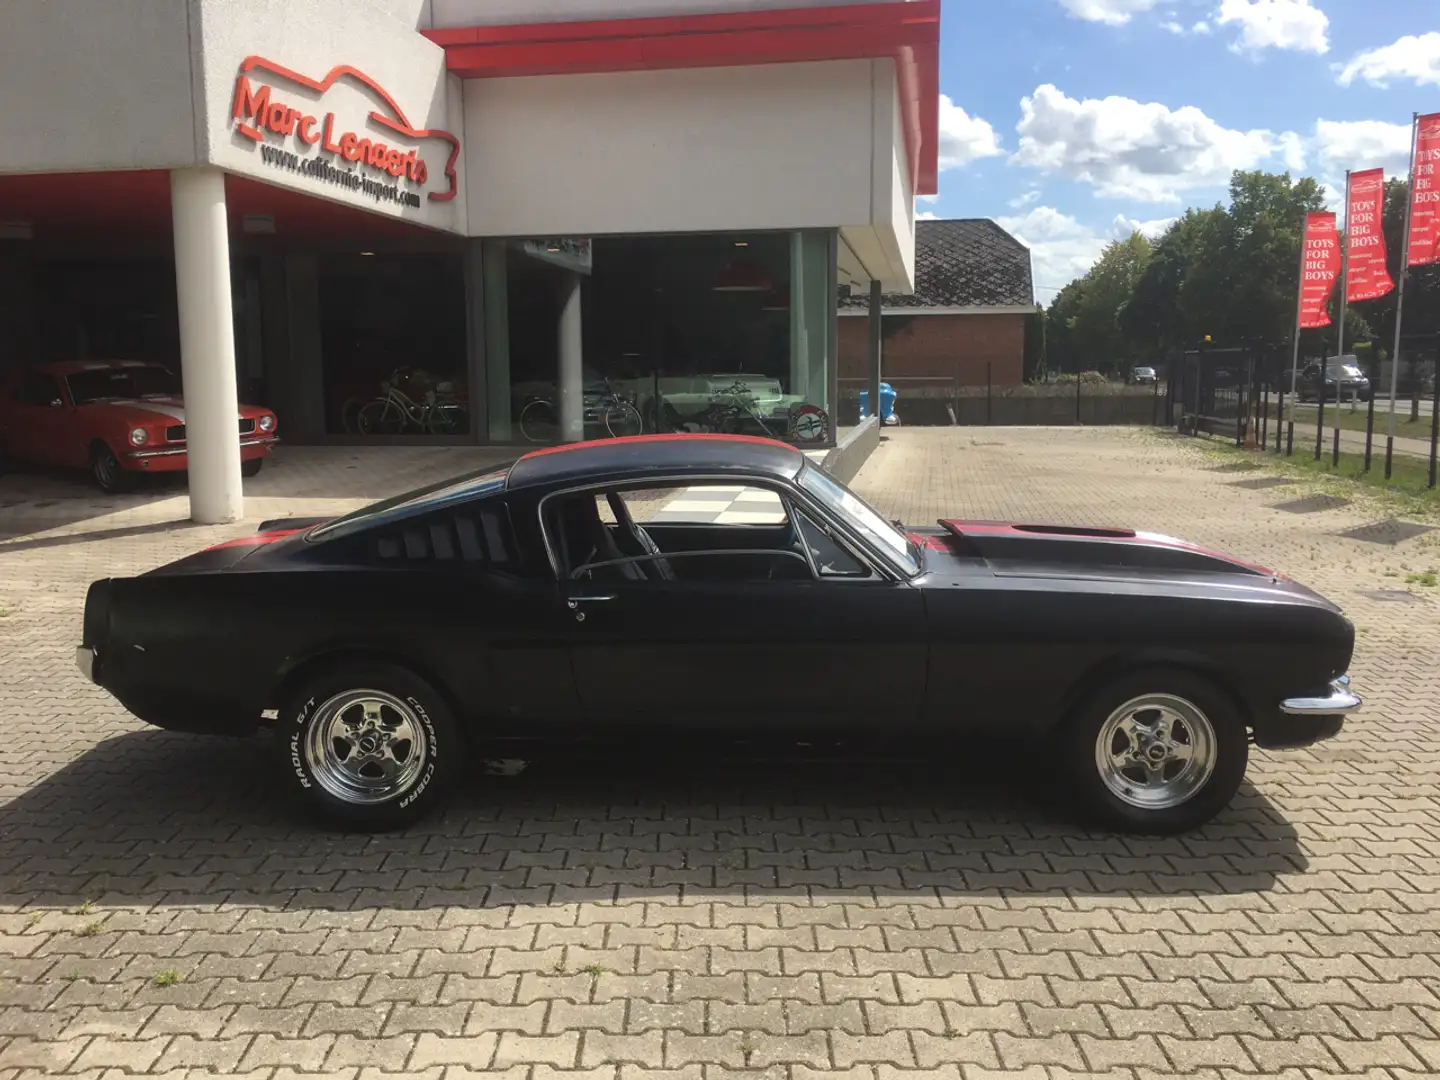 Ford Mustang fastback "OPENHOUSE 25&26 May" Nero - 1